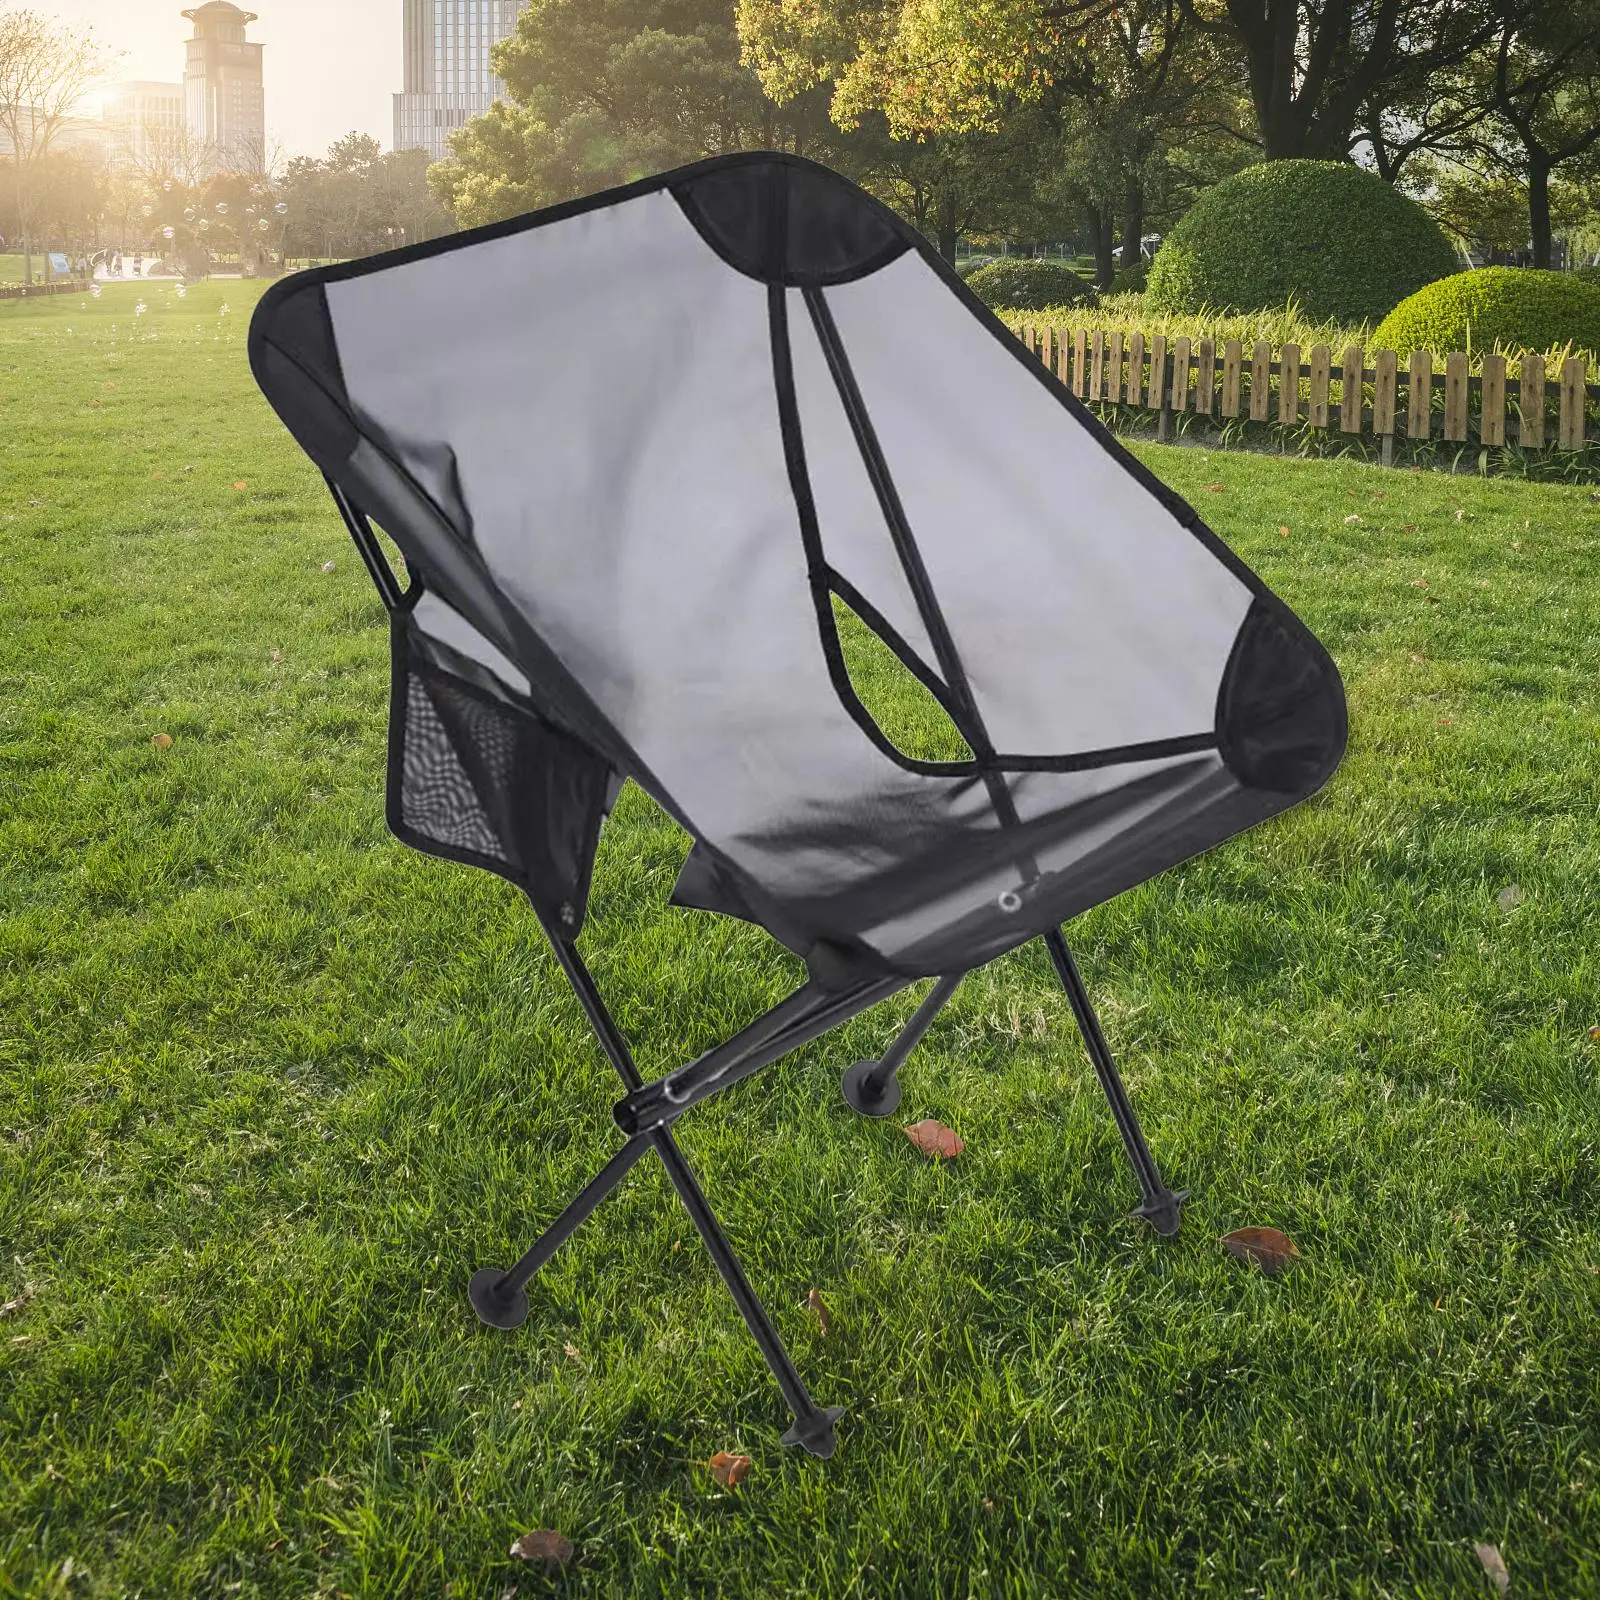 Folding Camping Chair Outdoor Moon Chair for Outdoor Collapsible with Carrying Bag Picnics Gardens Folding Chair Beach Chair